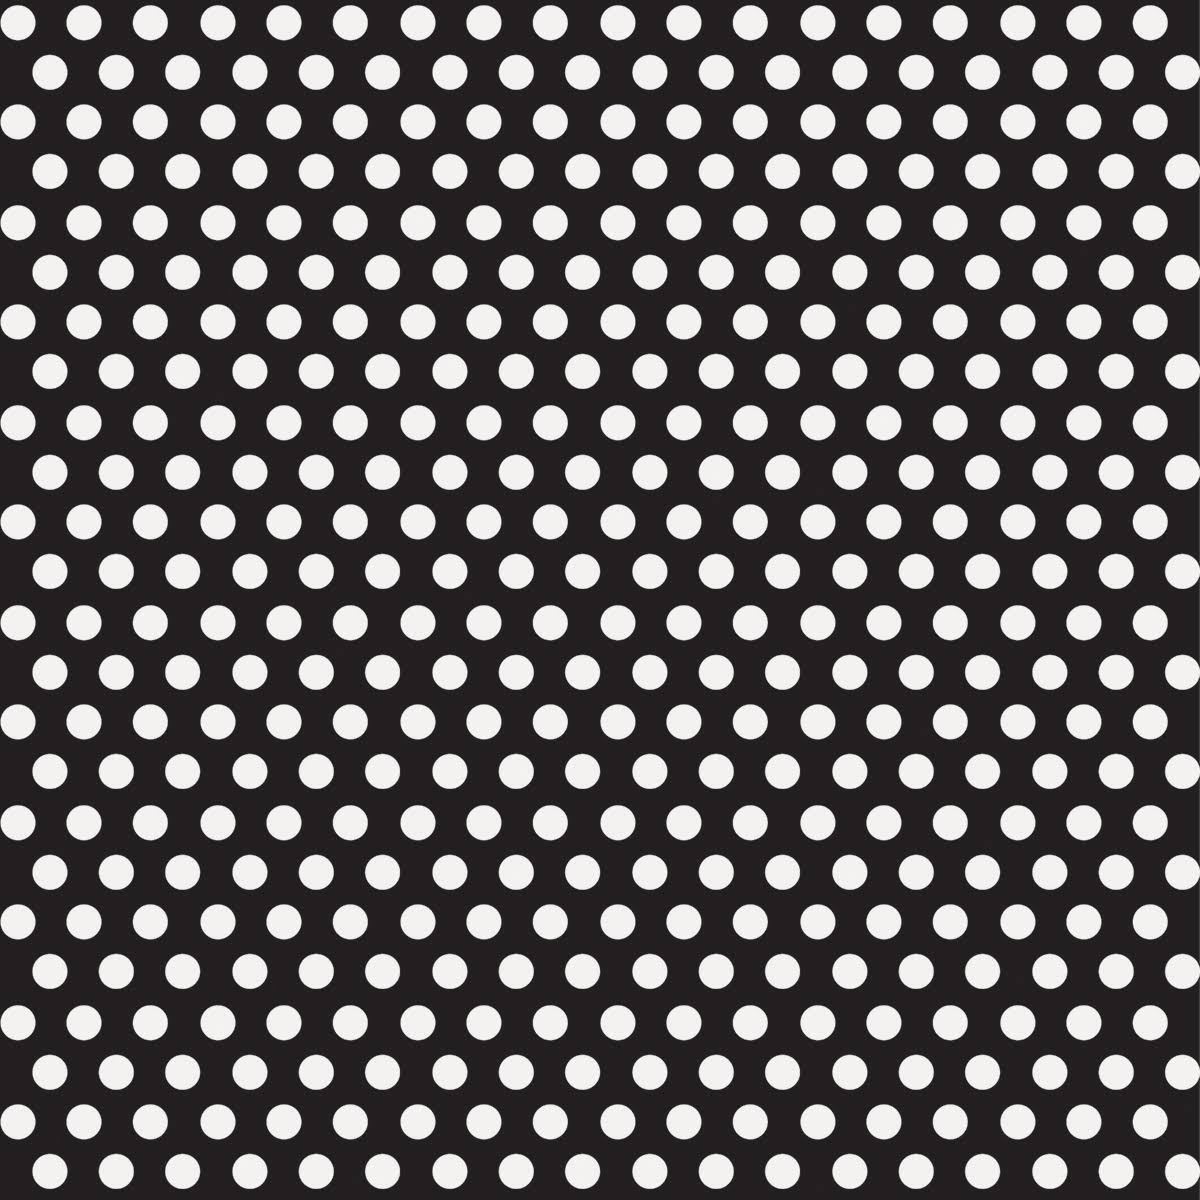 Unique Industries Polka Dot Wrapping Paper - Black